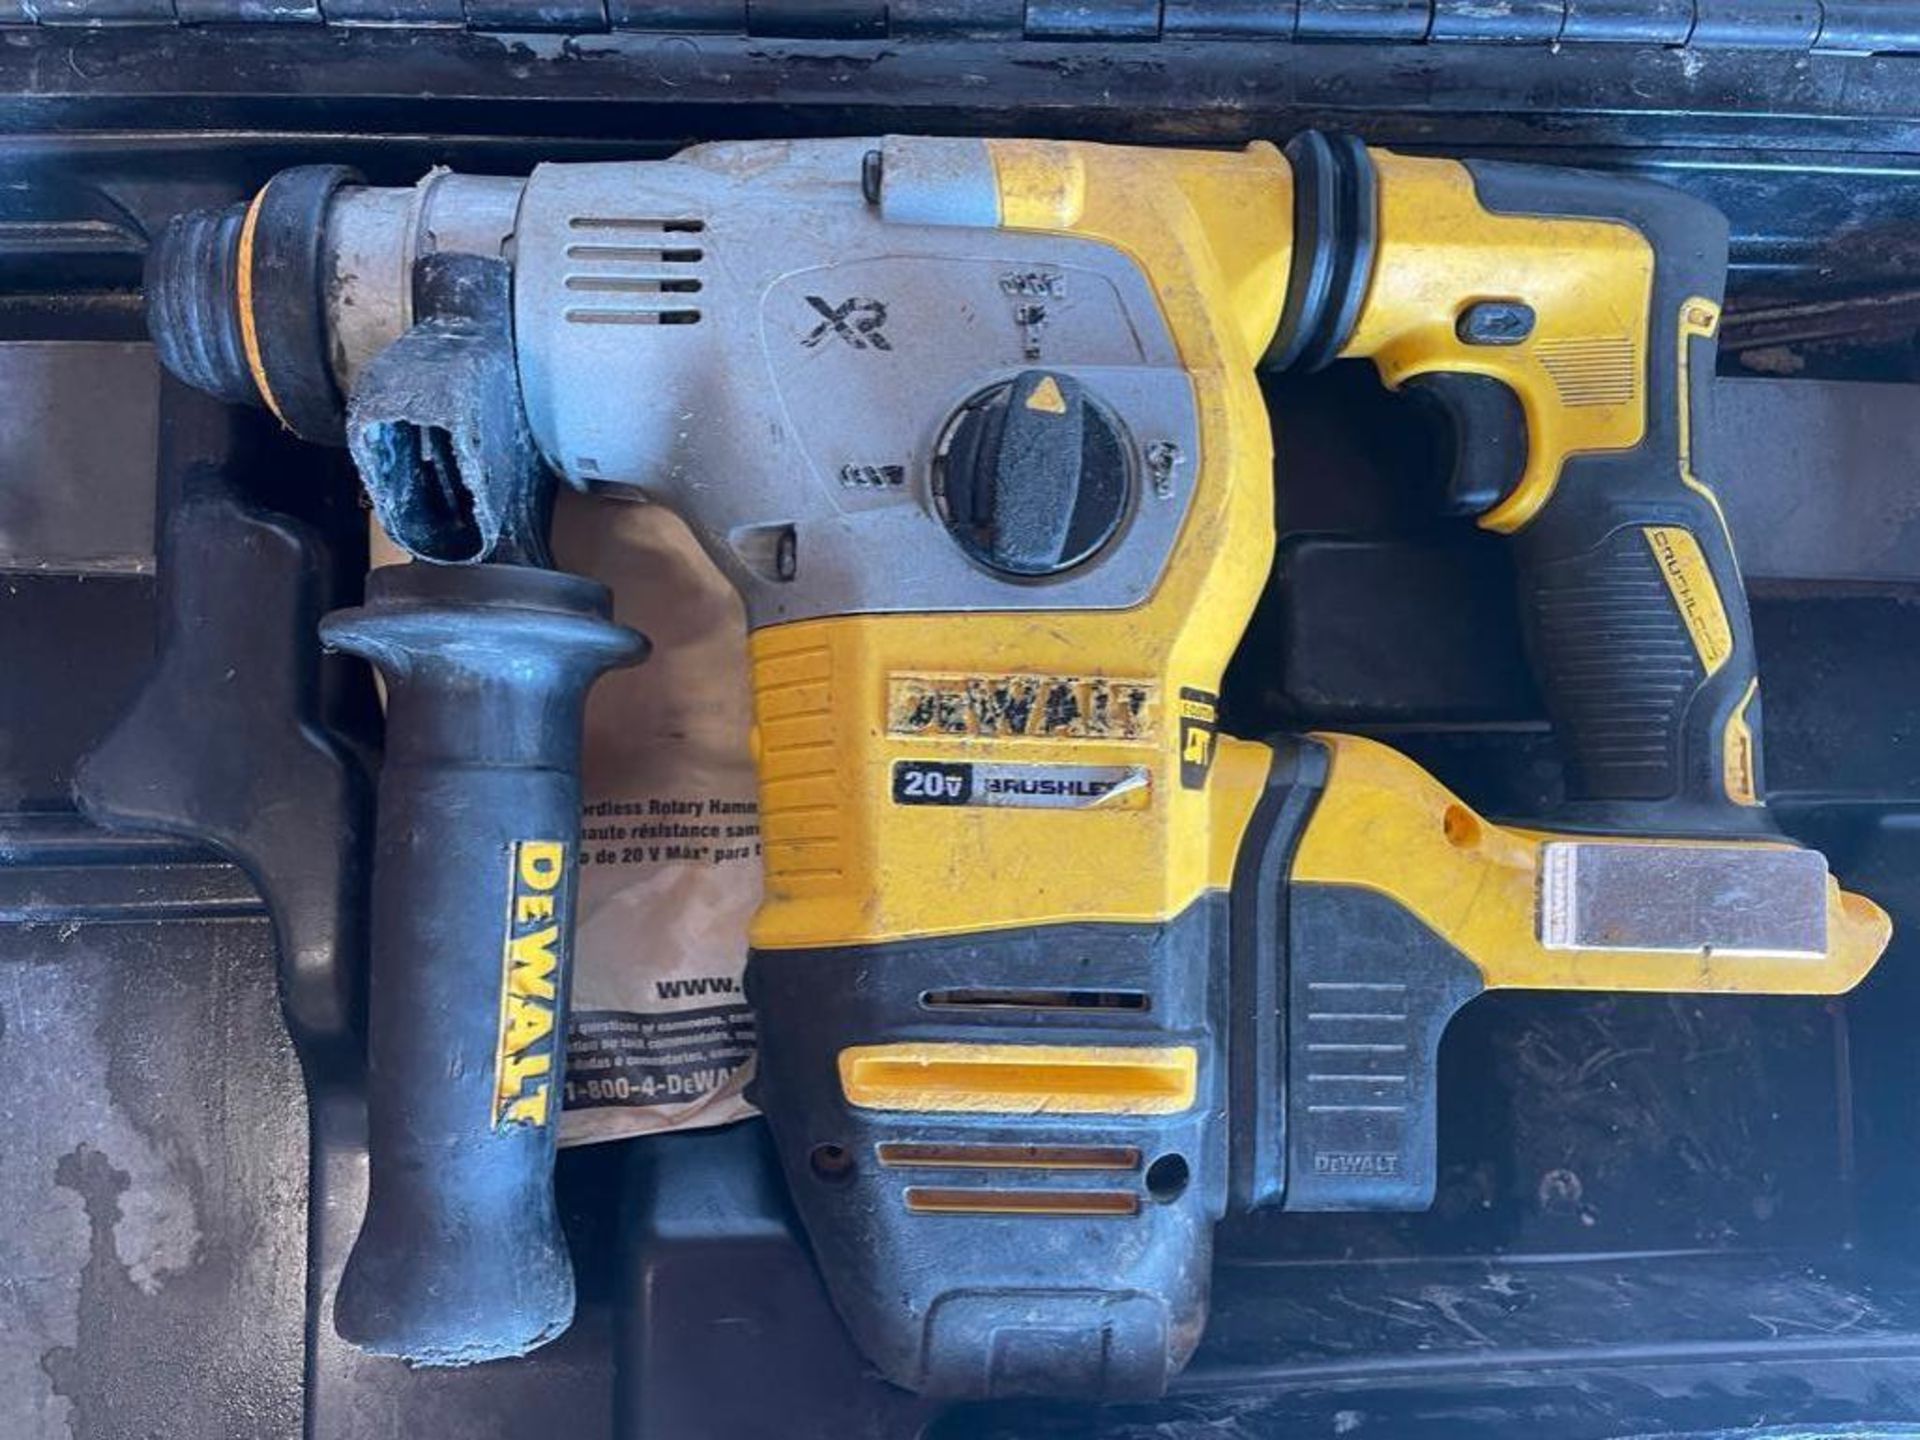 DeWalt DCH293 20V Heavy Duty Cordless Rotary Hammer in Case. Located in Hazelwood, MO - Image 2 of 7